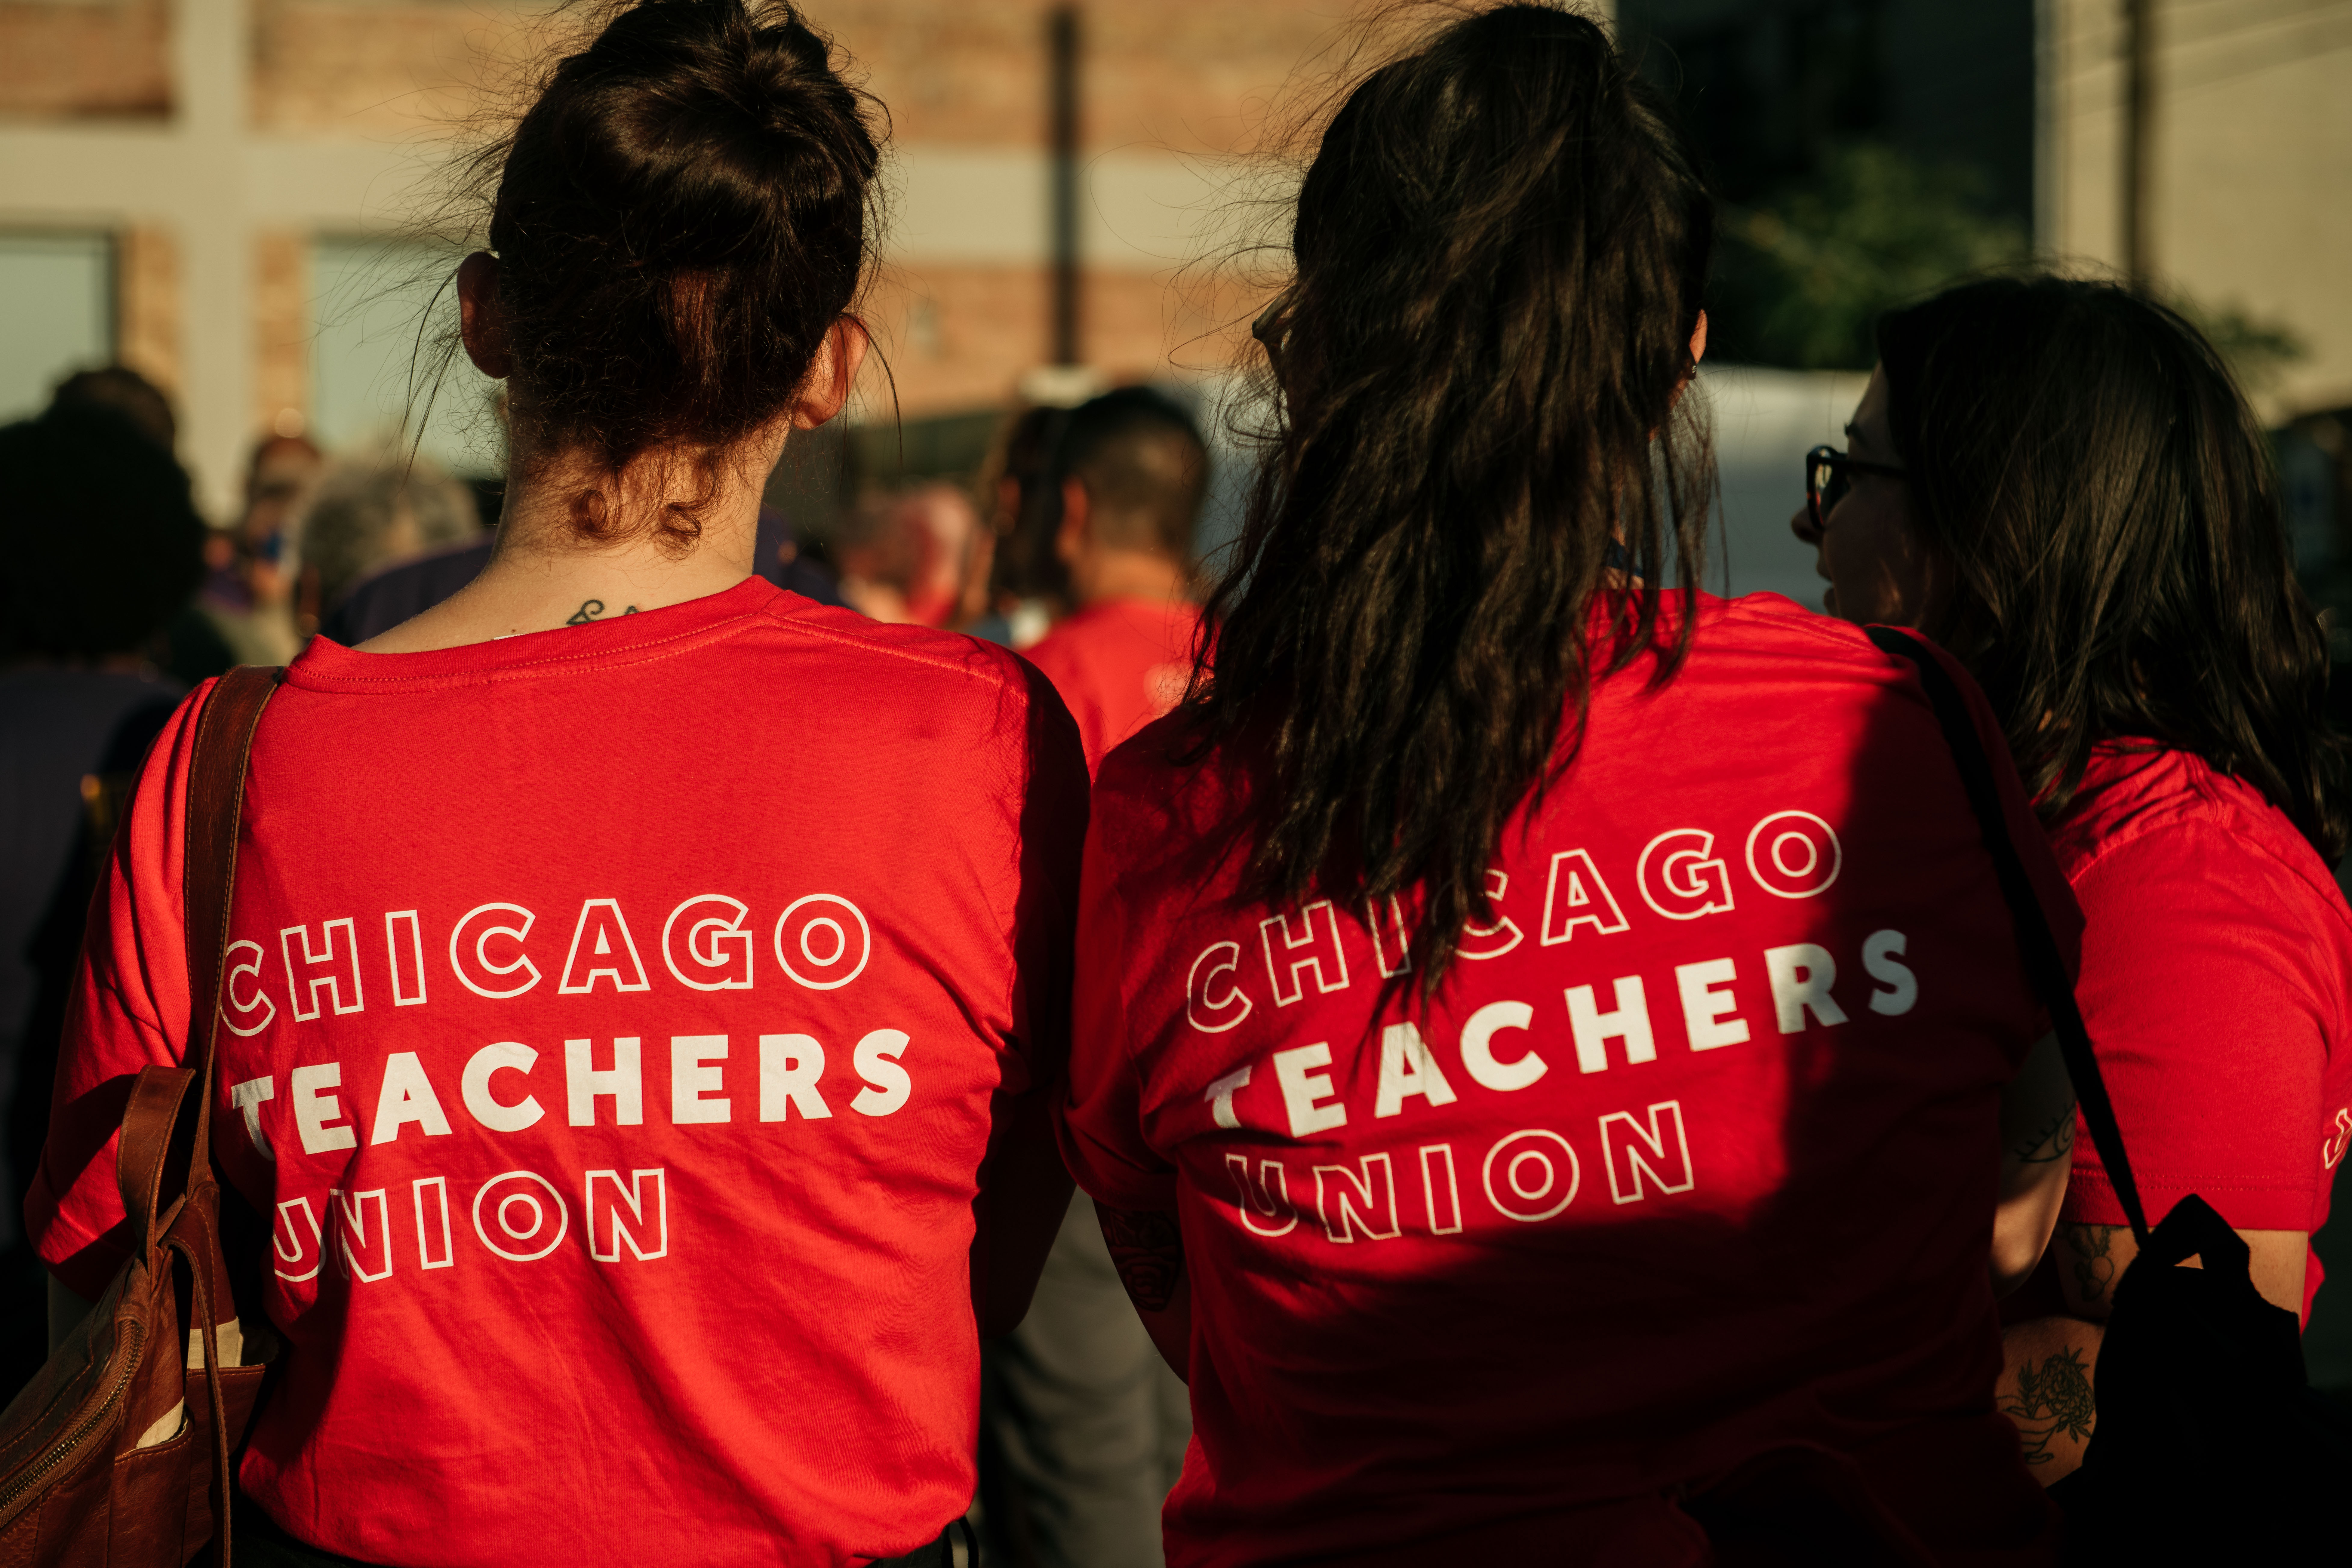 Two women stand together in red shirts with their backs facing. Text on their shirt reads: Chicago Teachers Union.